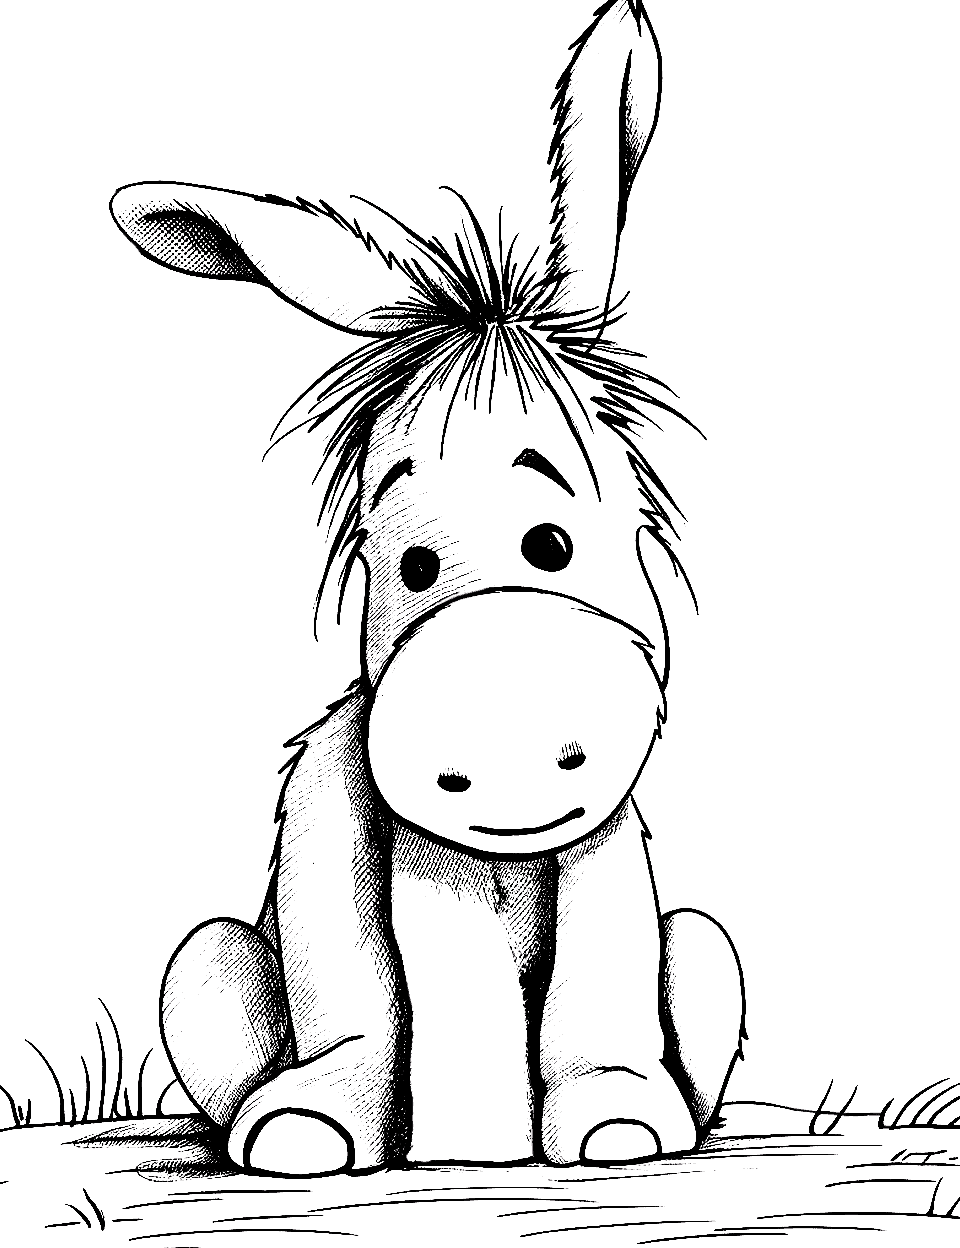 Eeyore's Gloomy Day Coloring Page - Eeyore sitting alone being sad in a sad pose.